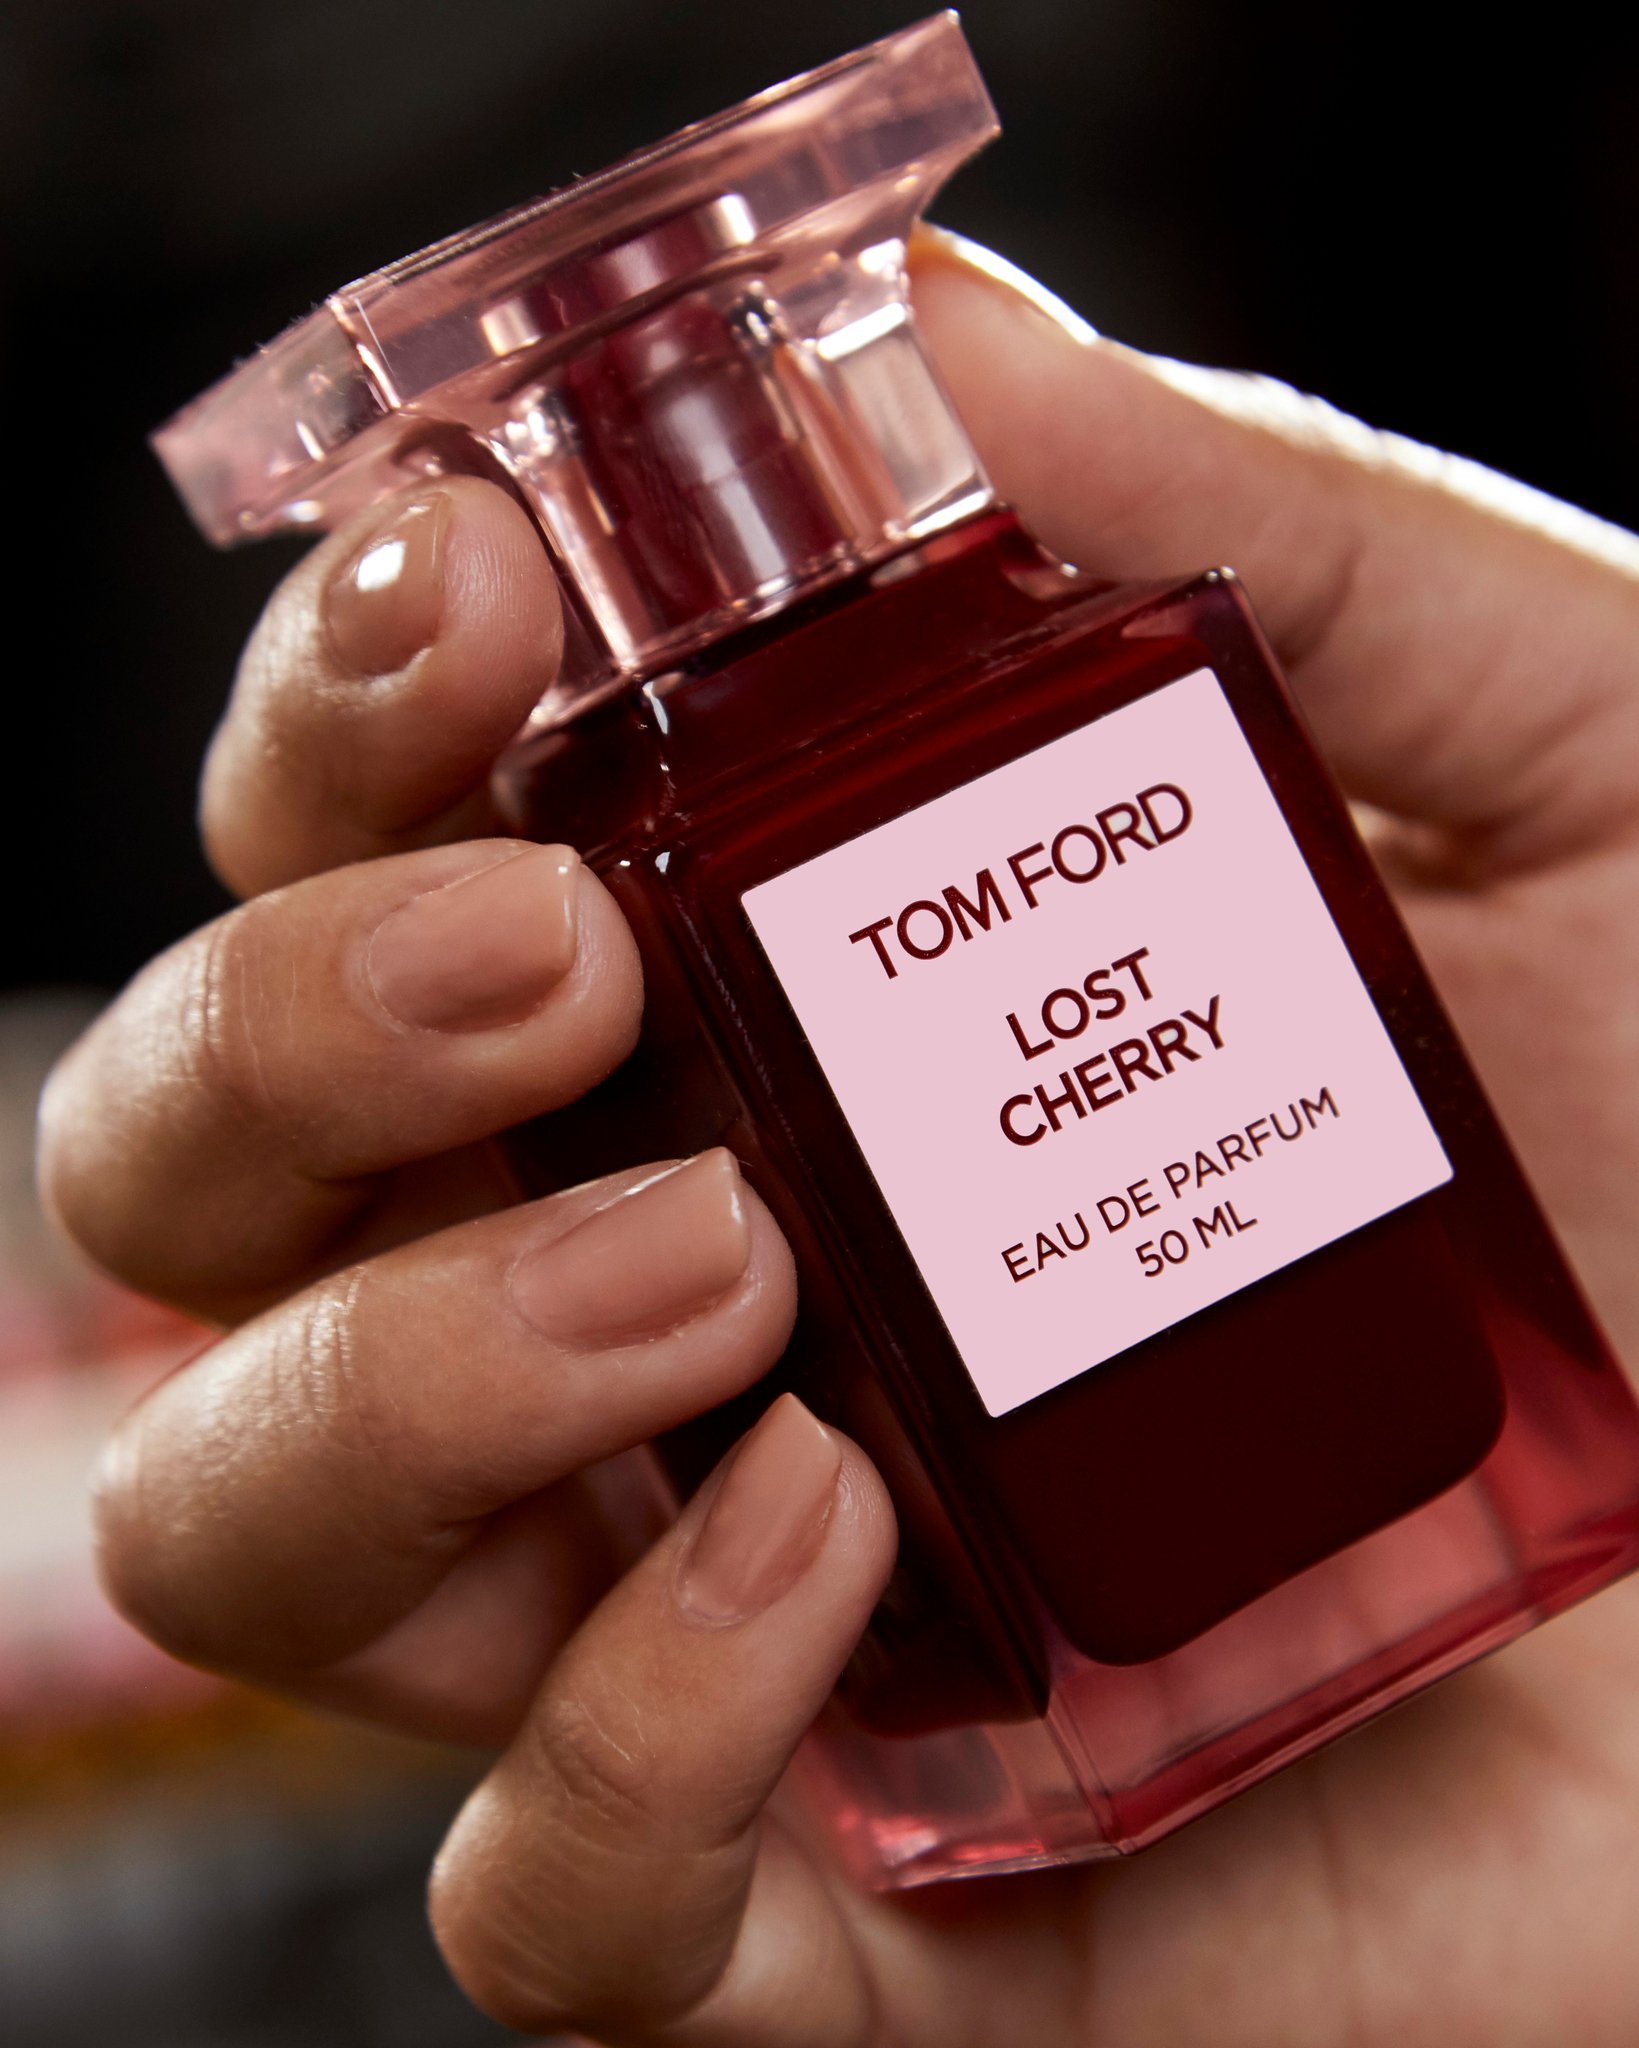 INTRODUCING TOM FORD'S LATEST FRAGRANCE LOST CHERRY